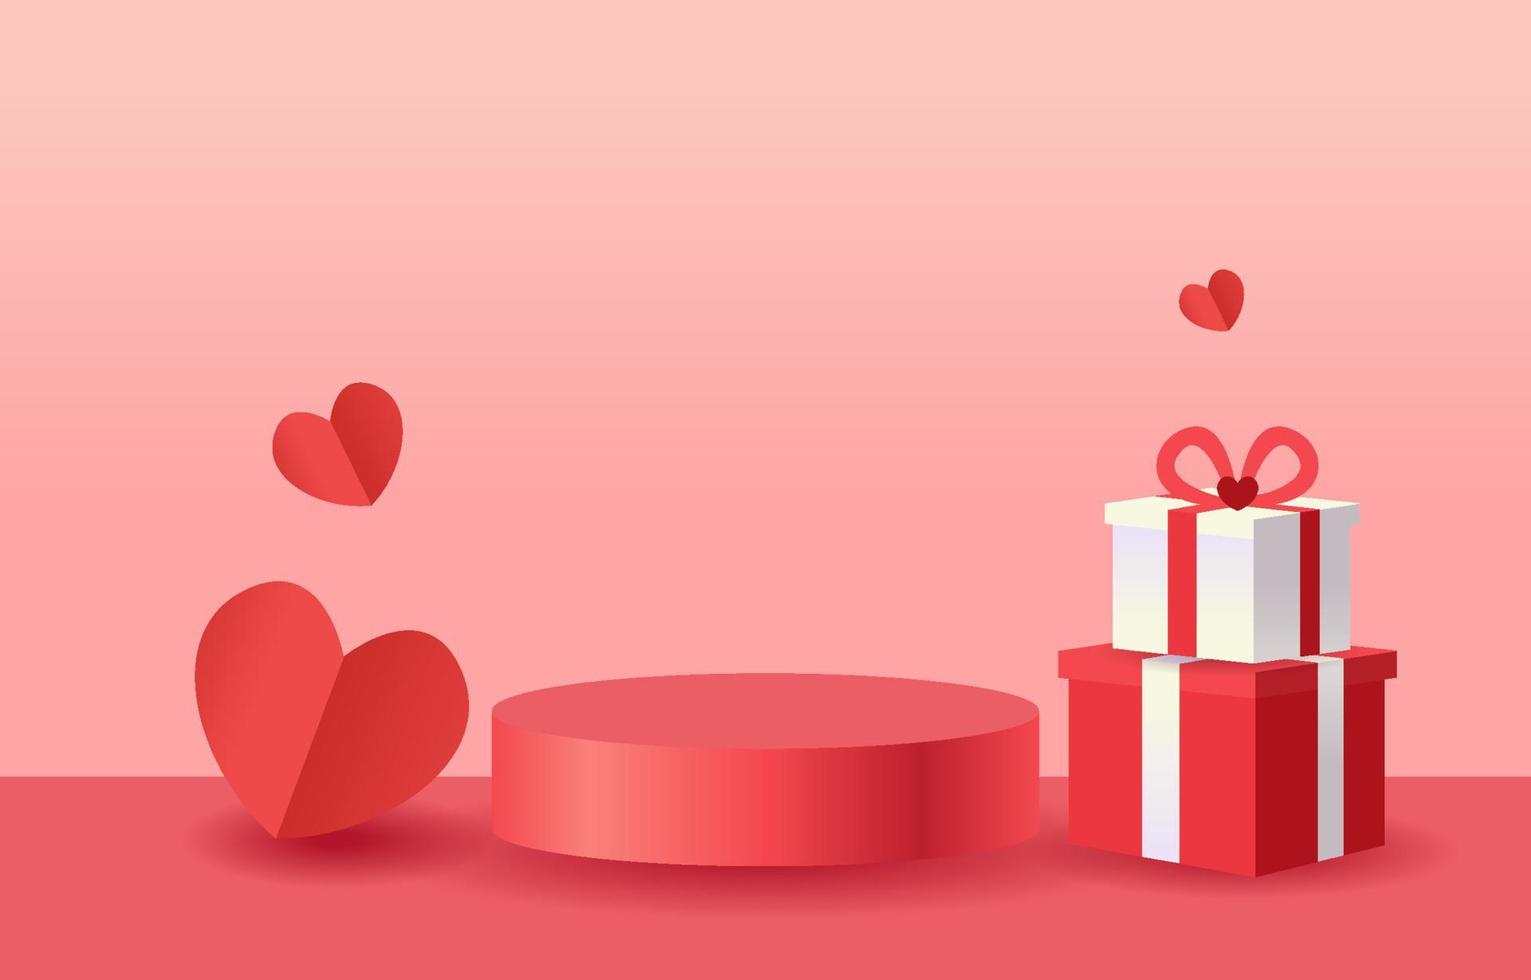 Beautiful background for Valentine or love. The cylindrical podium is a stand to show products. Decorated with hearts and gift boxes. Design for banner, web, mobile app, card, background, promotion. vector